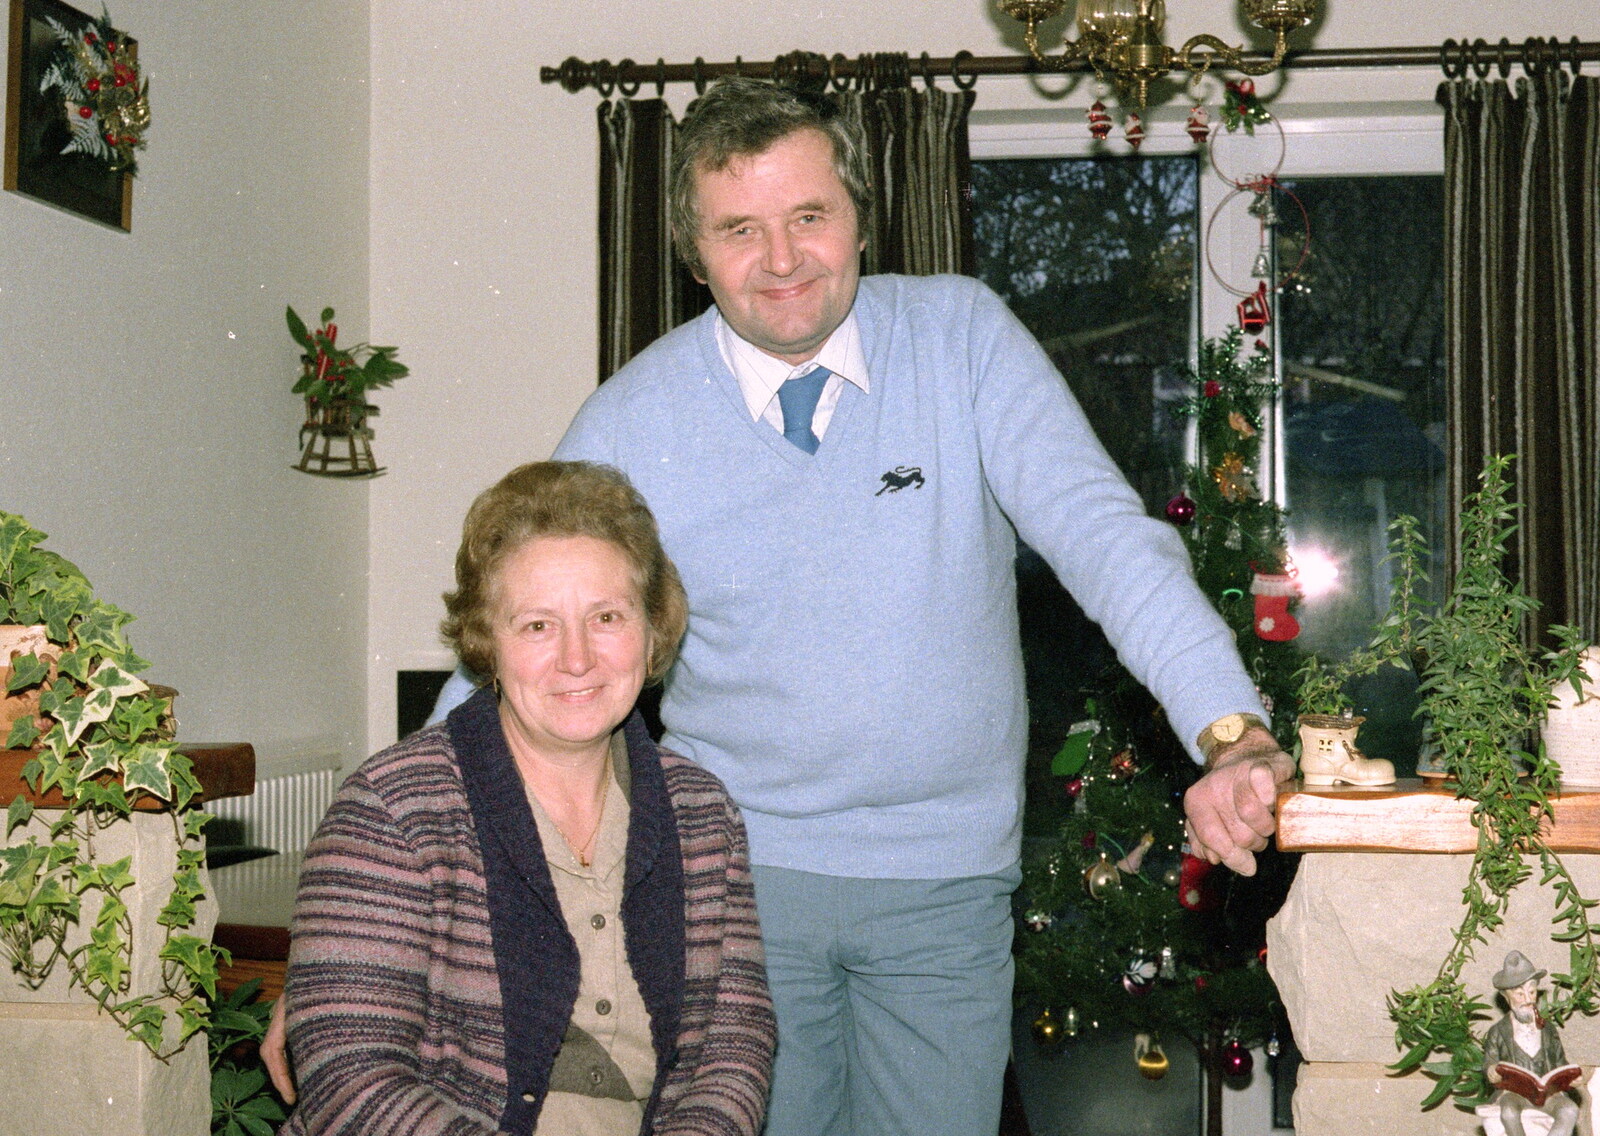 Norman and his wife from Christmas in Macclesfield and Wetherby, Cheshire  and Yorkshire - 25th December 1985